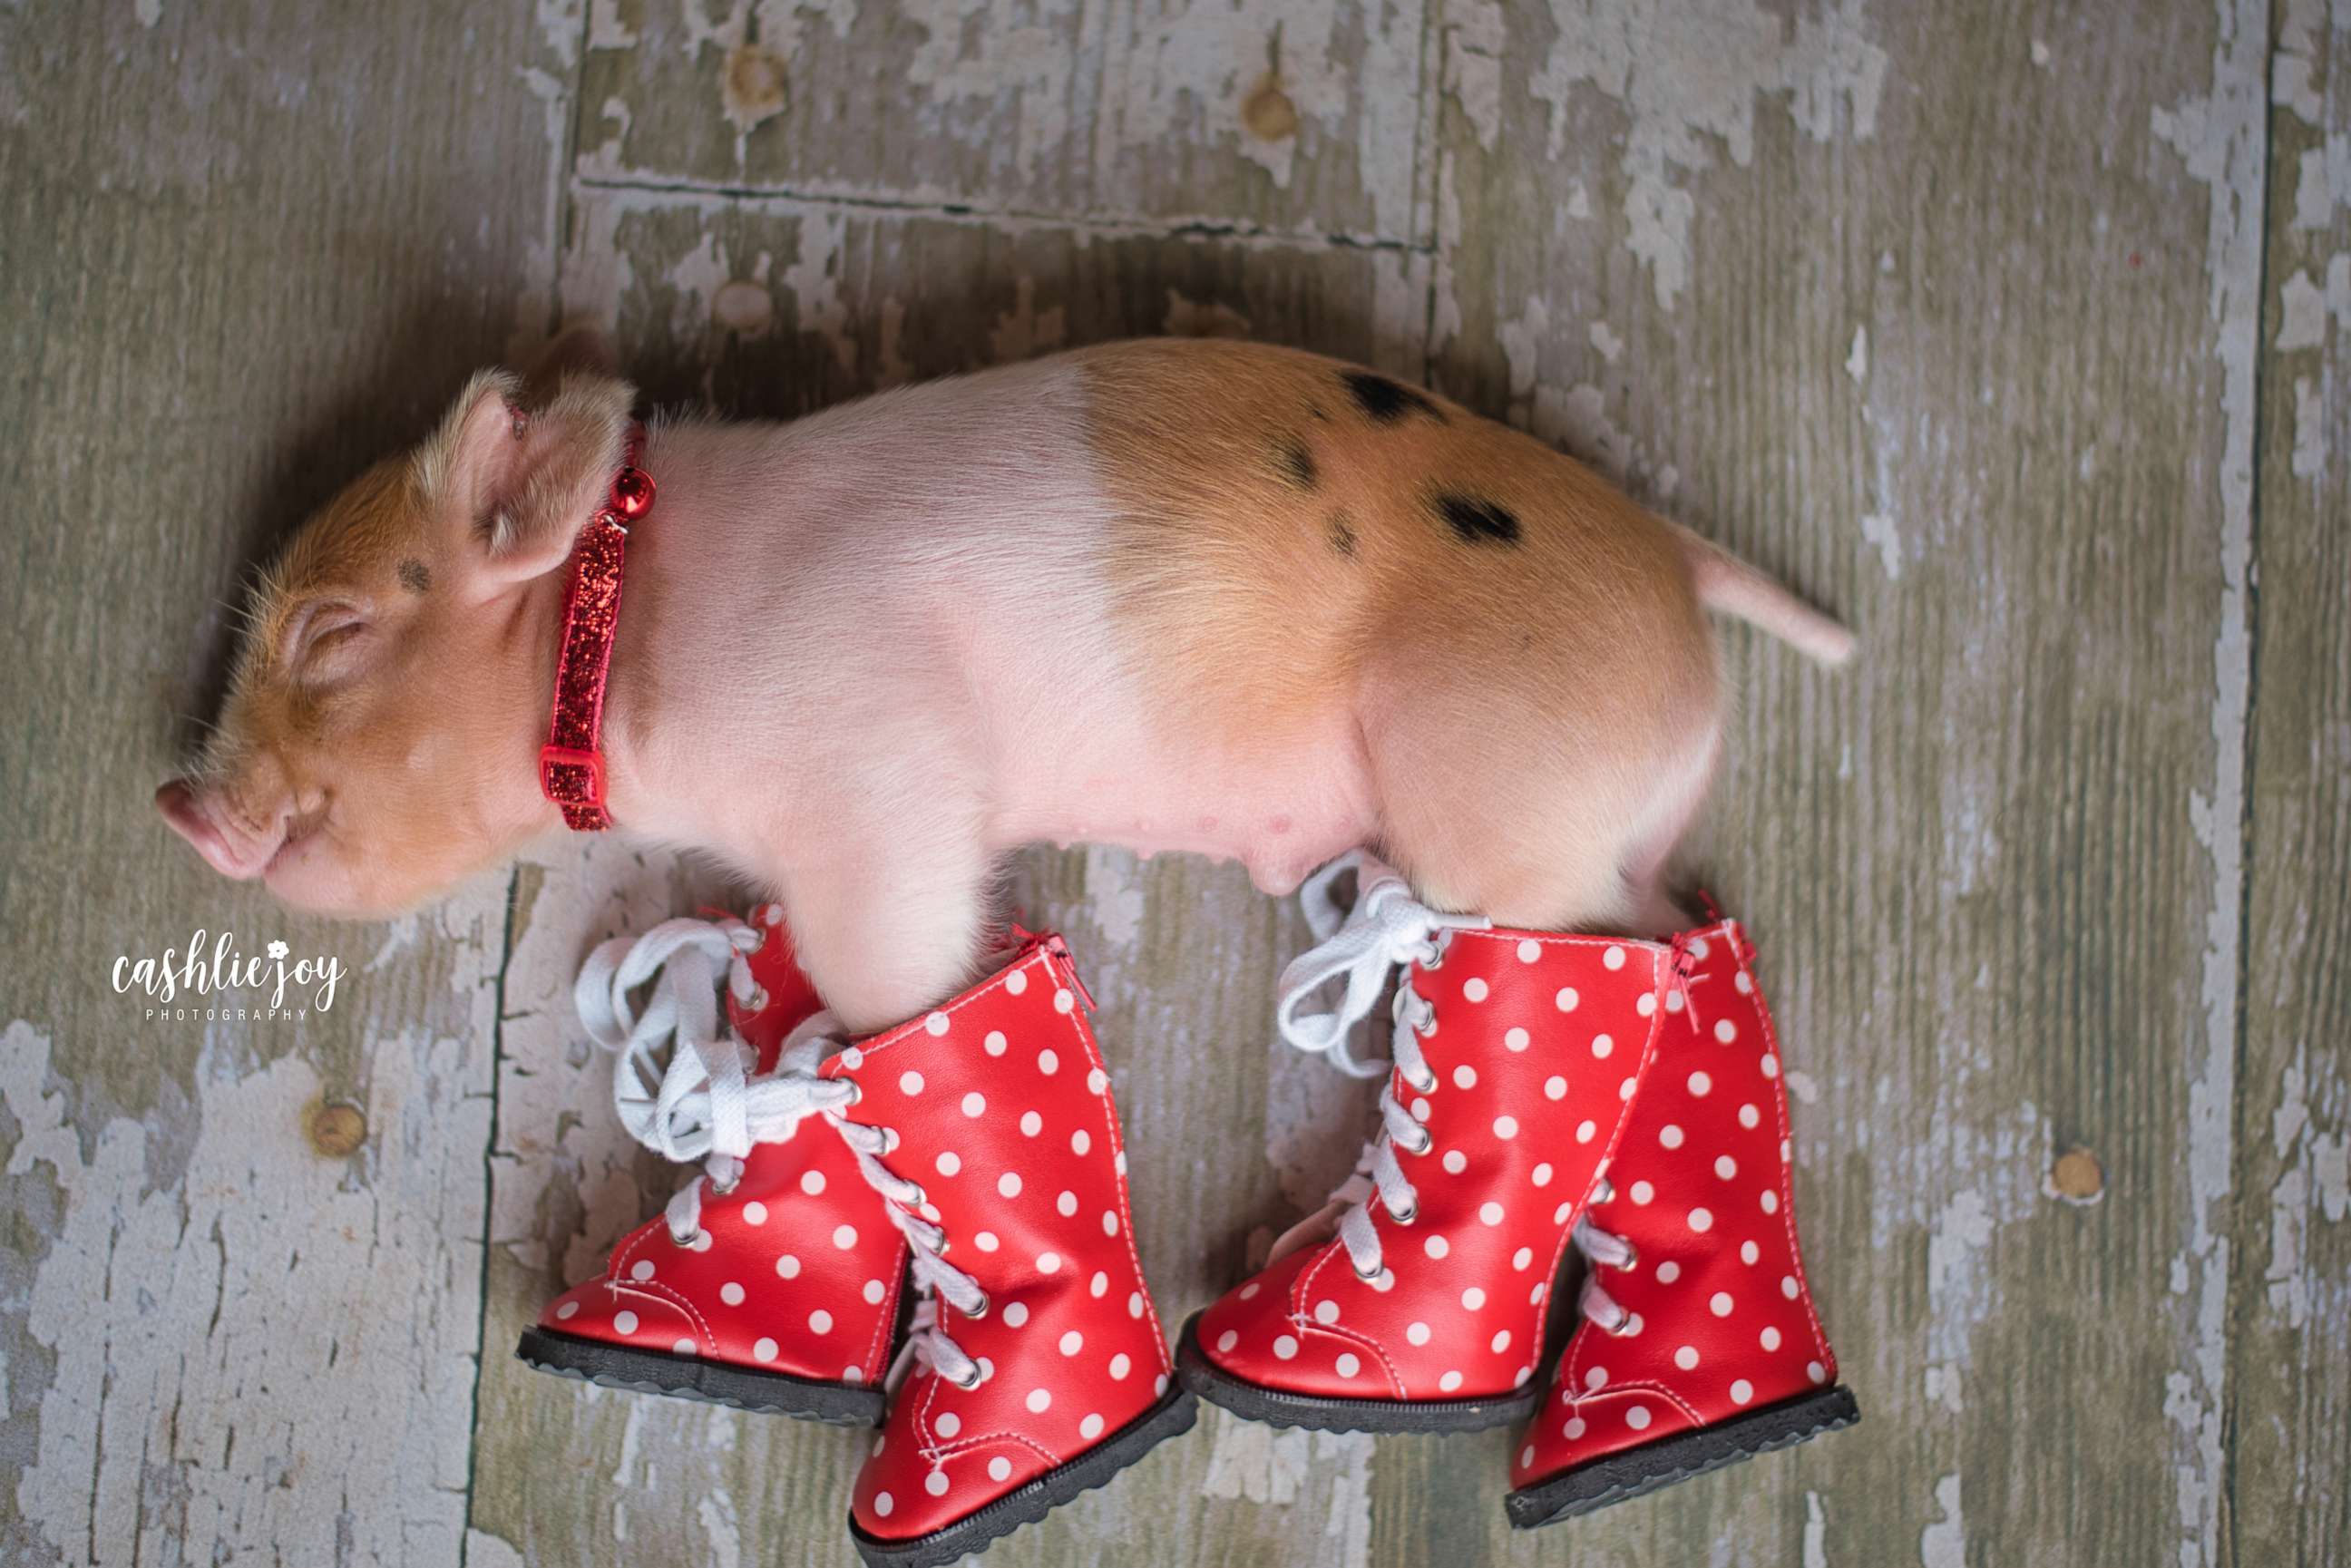 PHOTO: Dynamite lays down with polka dot boots on.